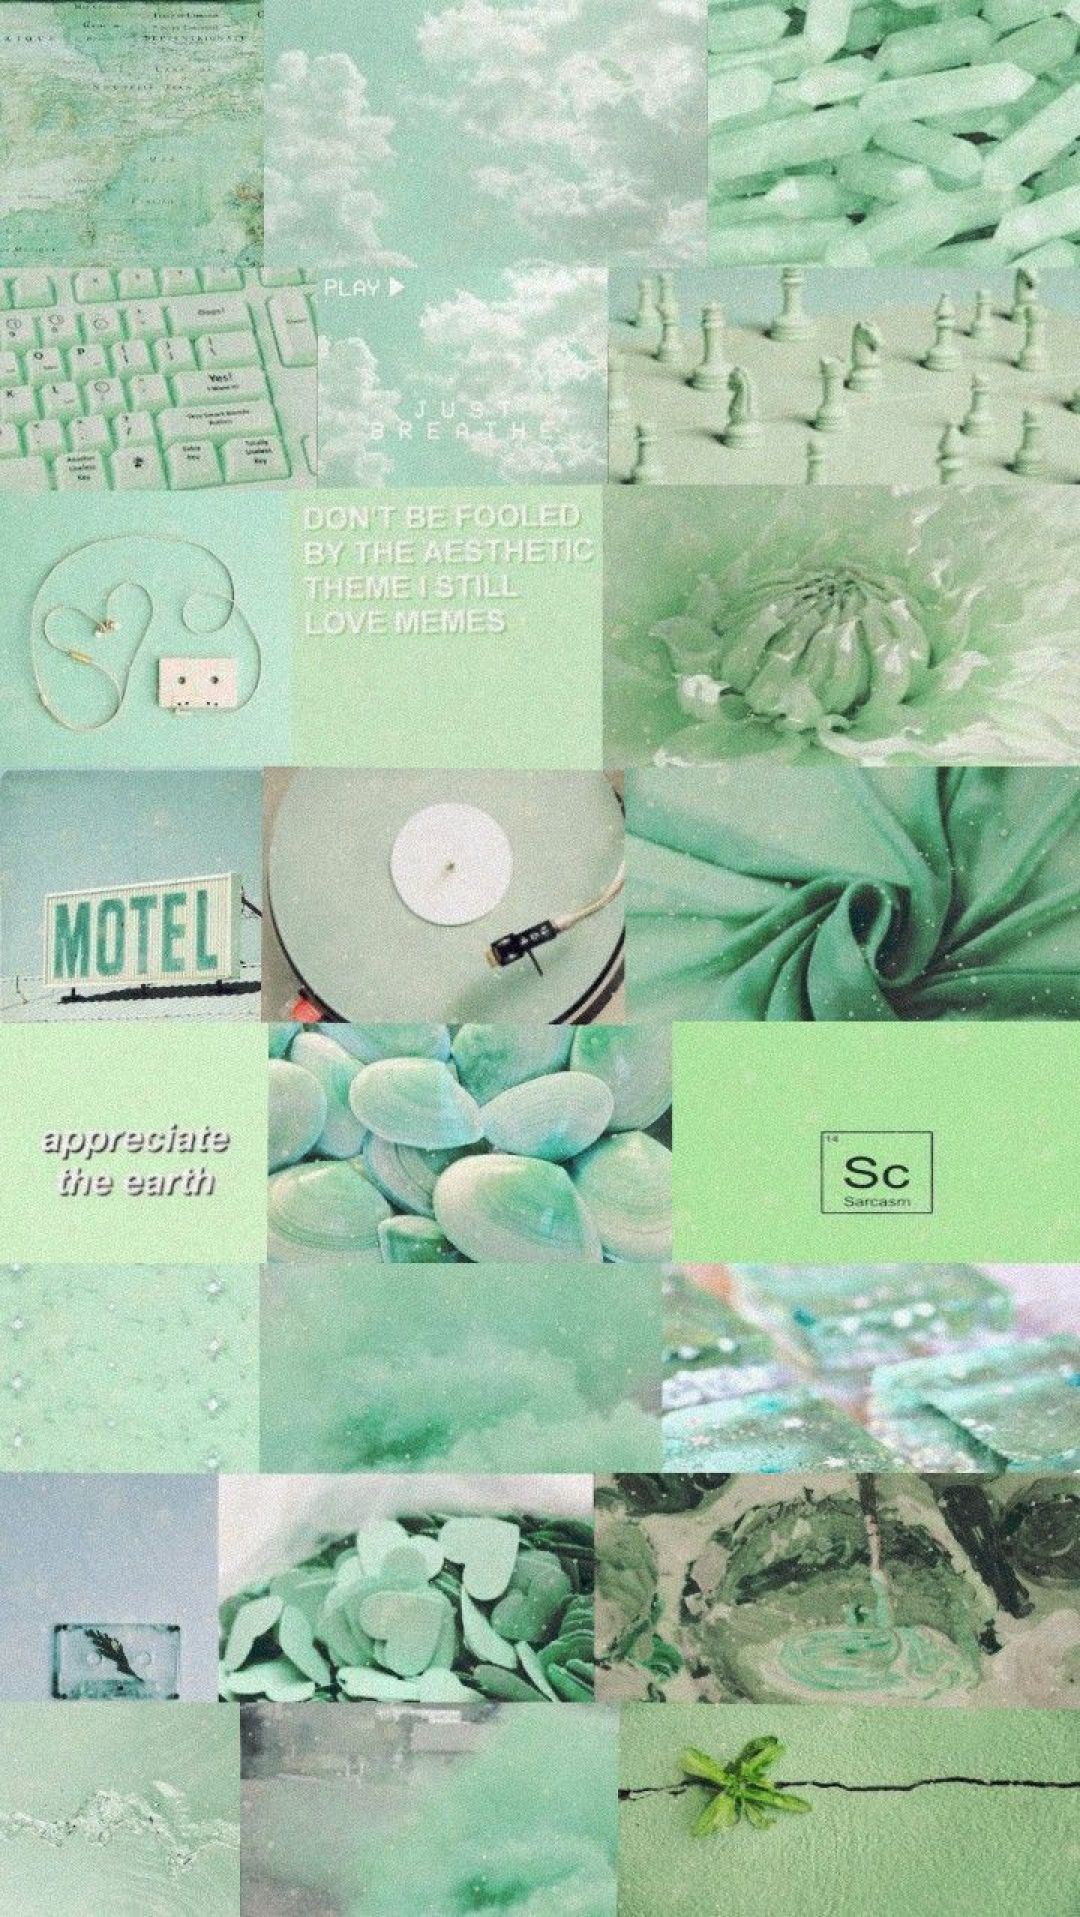 Aesthetic Mint Green Wallpaper for iPhone with high-resolution 1080x1920 pixel. You can use this wallpaper for your iPhone 5, 6, 7, 8, X, XS, XR backgrounds, Mobile Screensaver, or iPad Lock Screen - Light green, mint green, pastel green, soft green